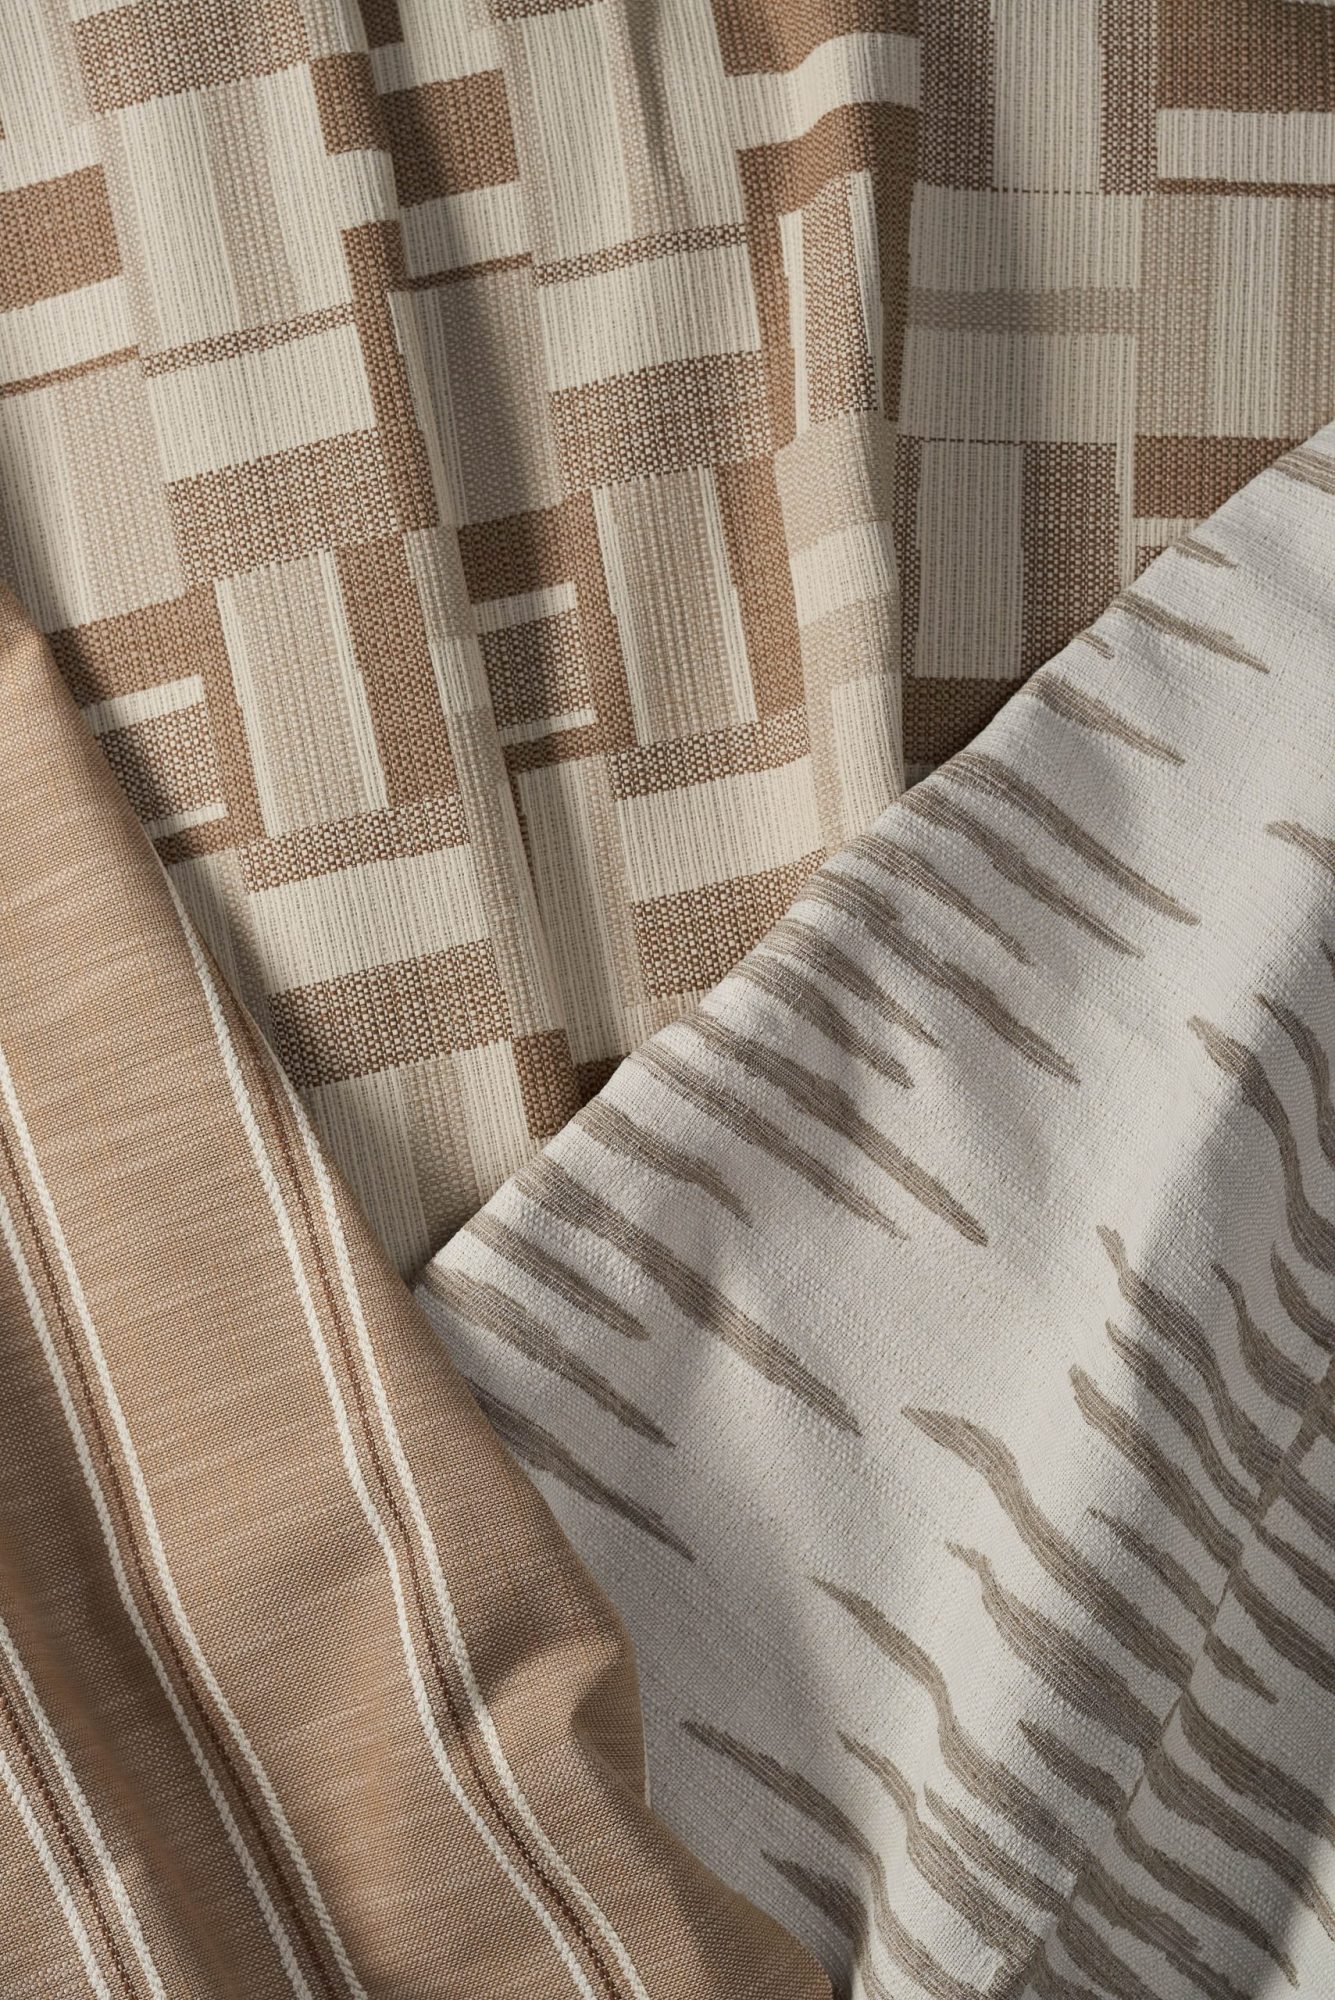 neutral tan and beige patterned fabric